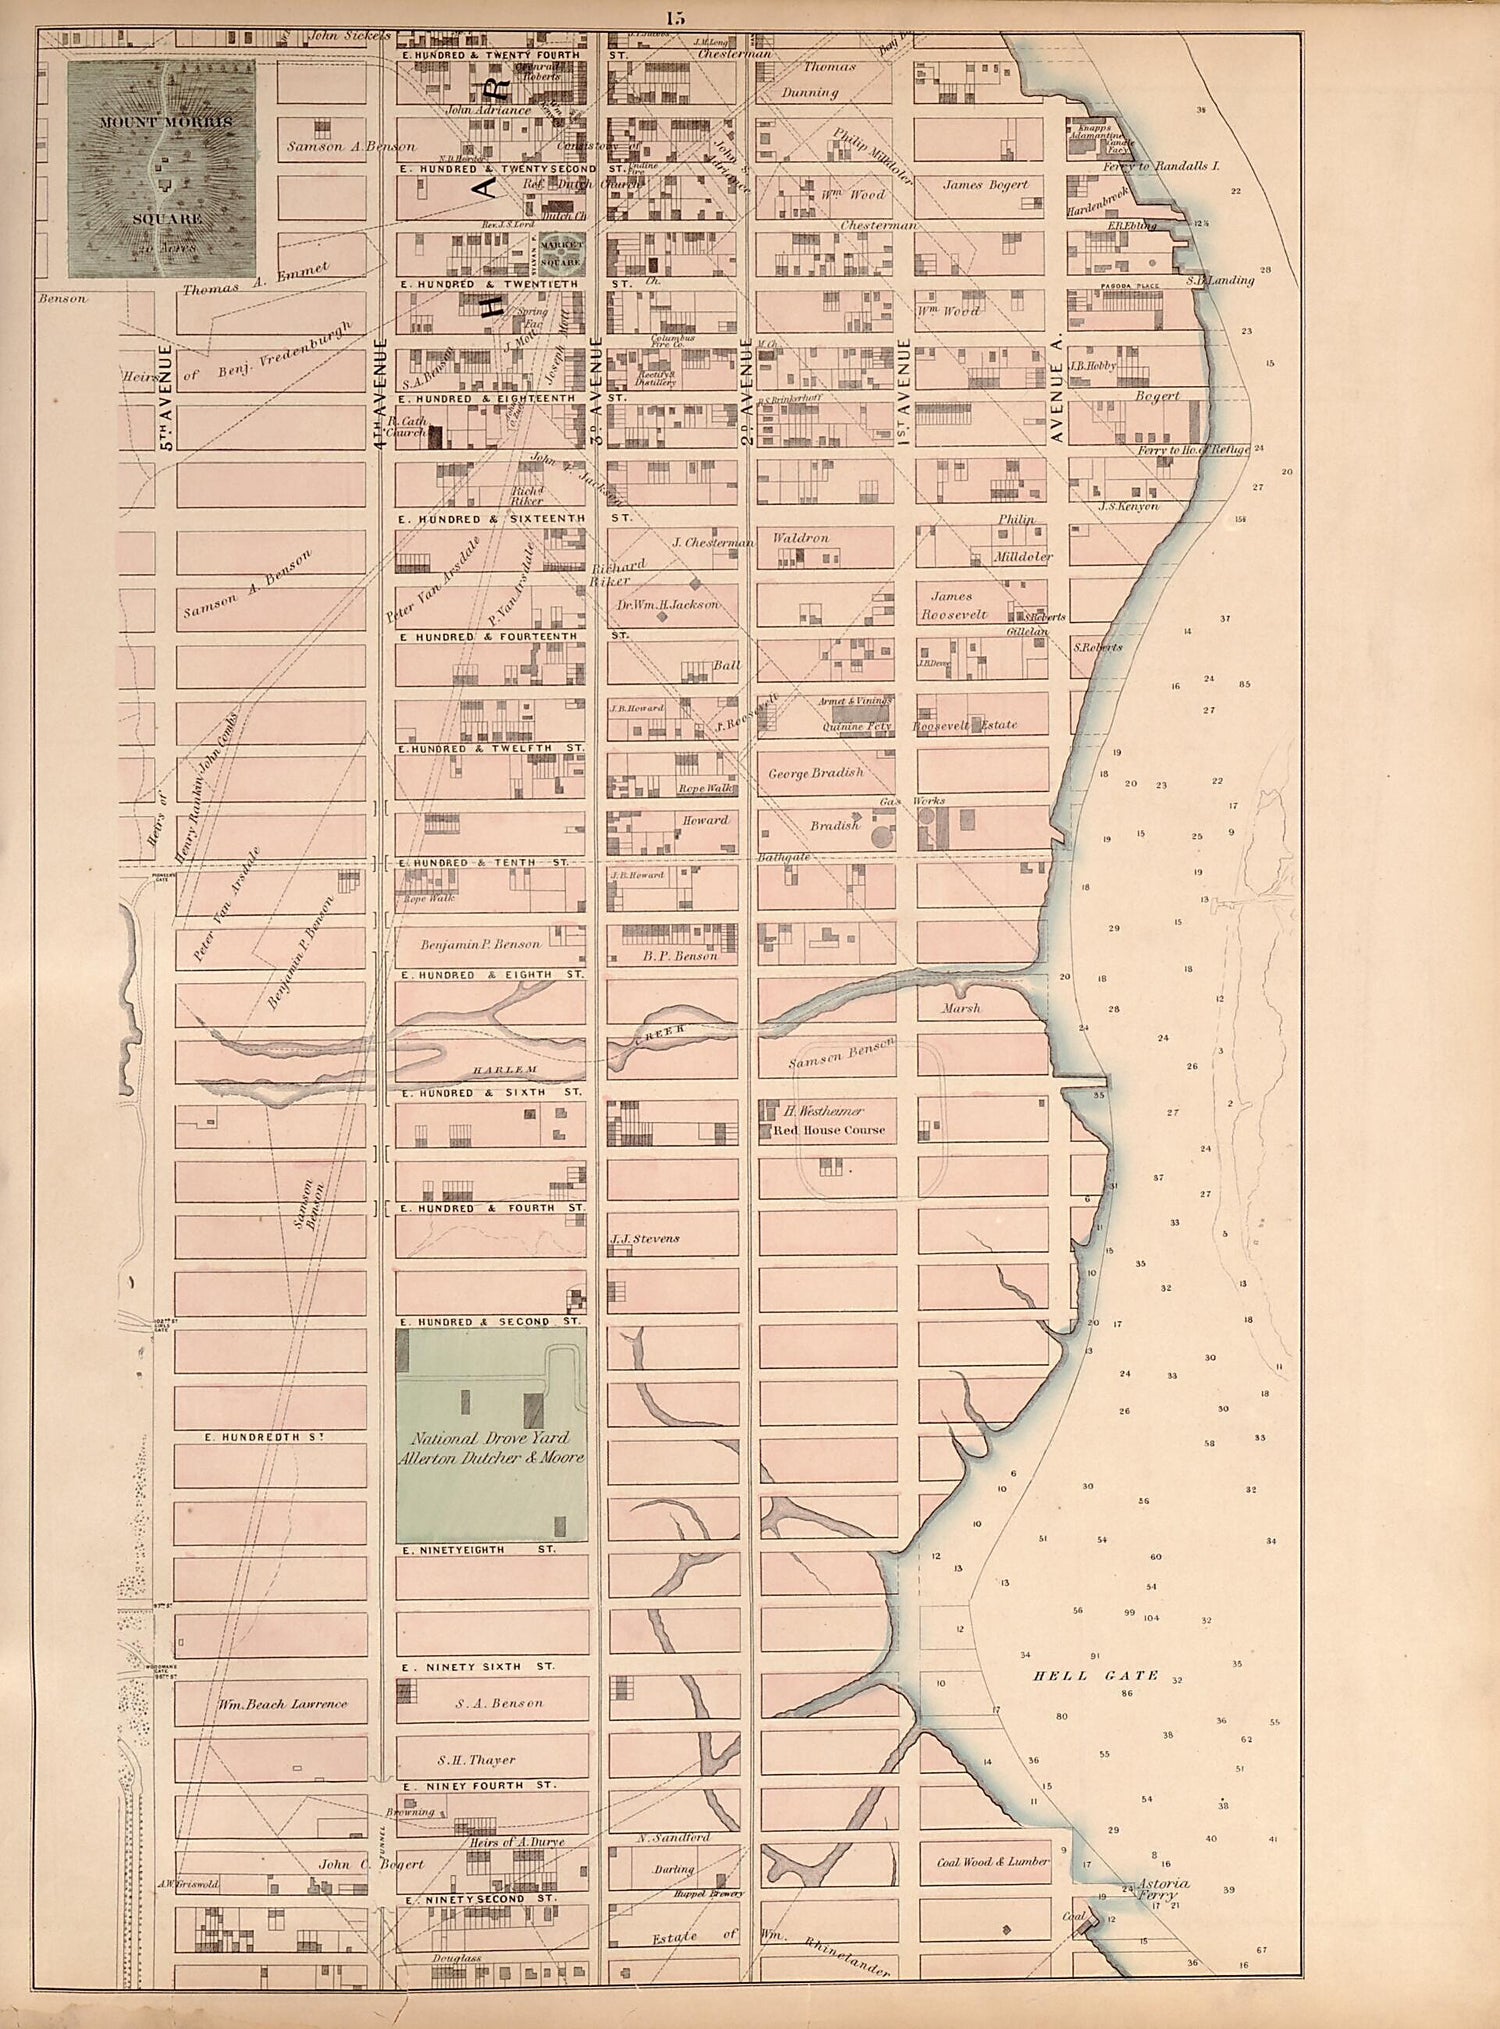 This old map of Plate 15 from Plan of New York City from the Battery to Spuyten Duyvil Creek from 1866 was created by John F. Harrison in 1866